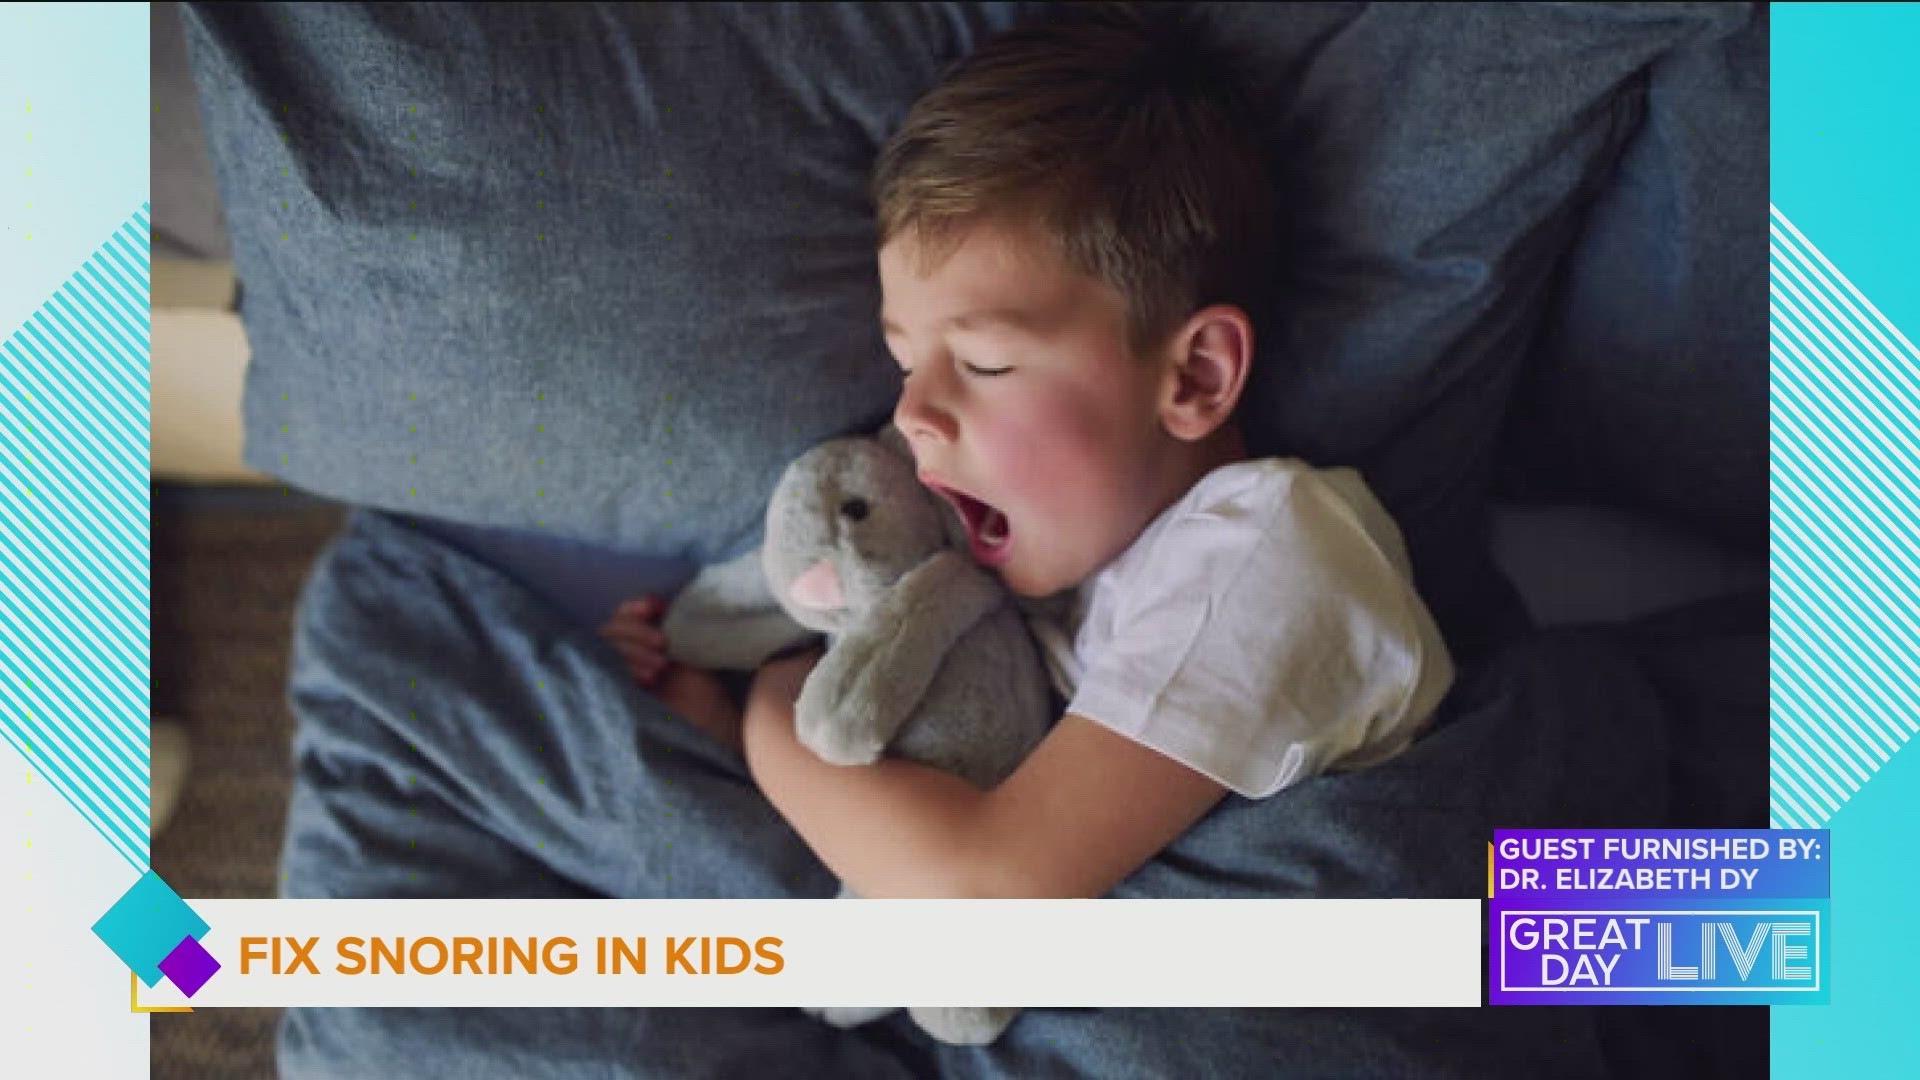 Regular snoring can lead to health problems in kids. GDL gets tips on how to help them breathe easier at night.